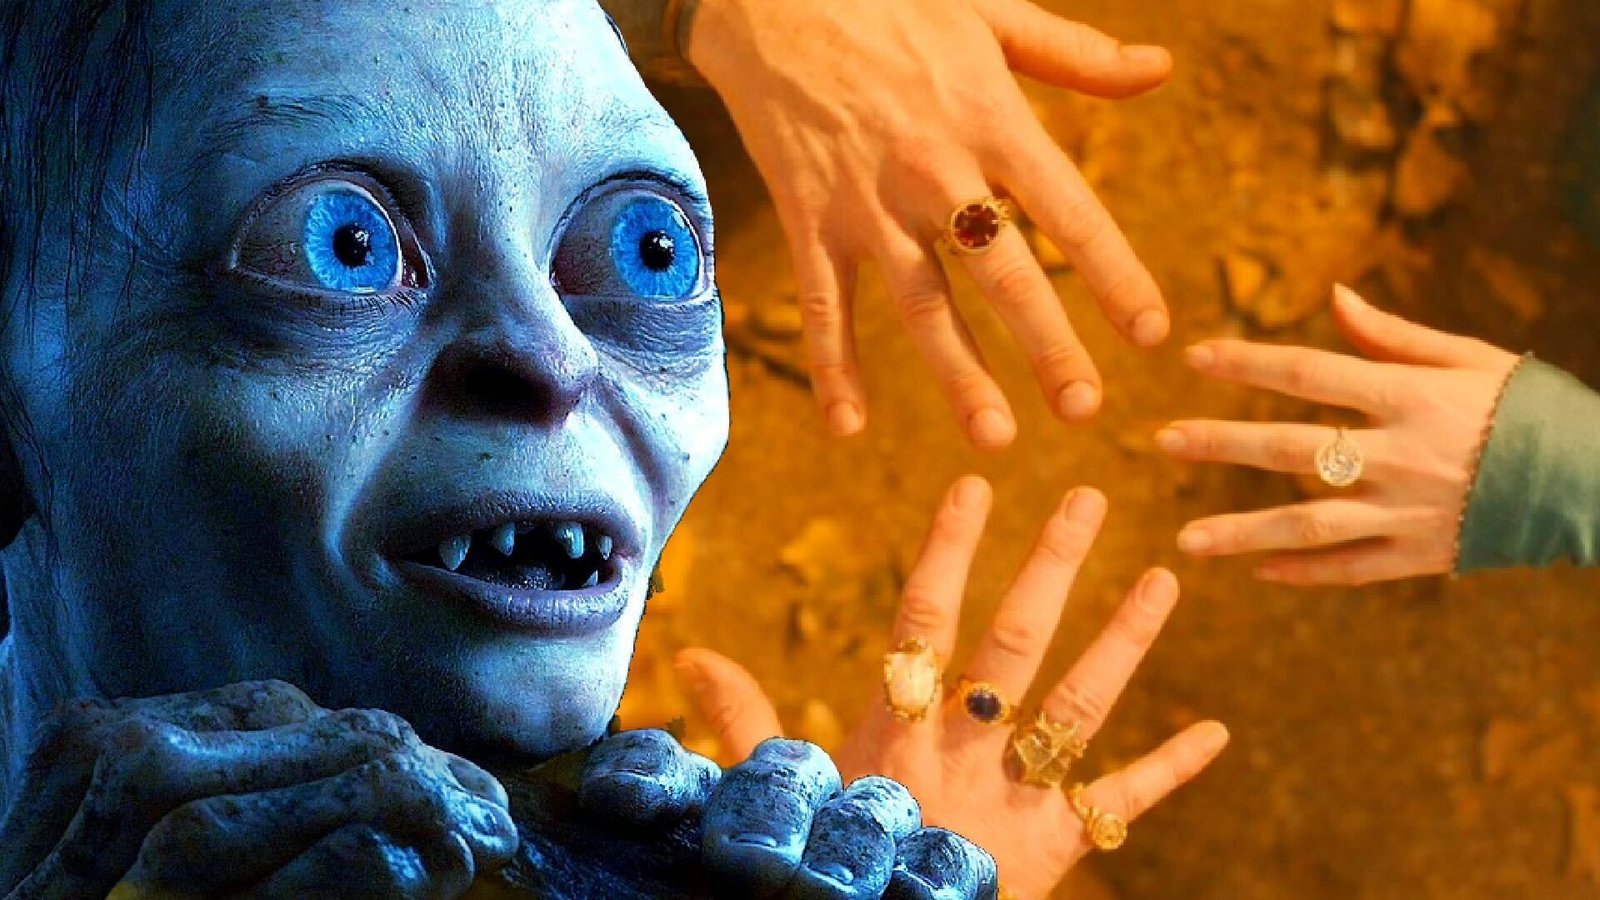 The Hunt For Gollum Team On Character Crossovers and Competing With Amazon's Rings of Power